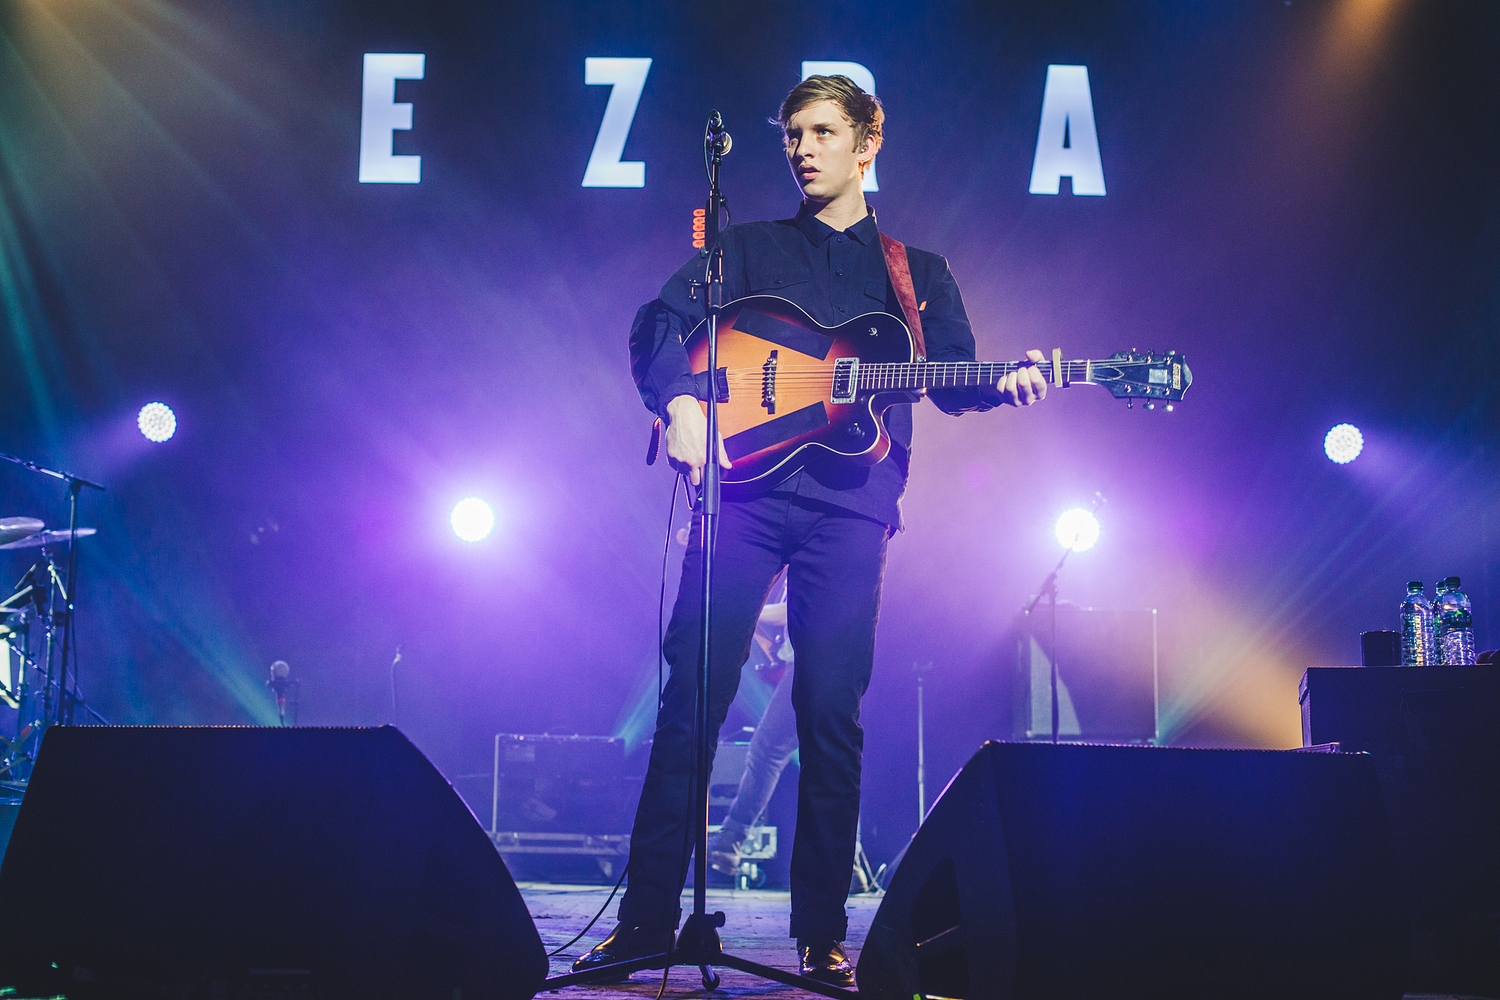 Watch George Ezra bring ‘Budapest’ to The Late Late Show